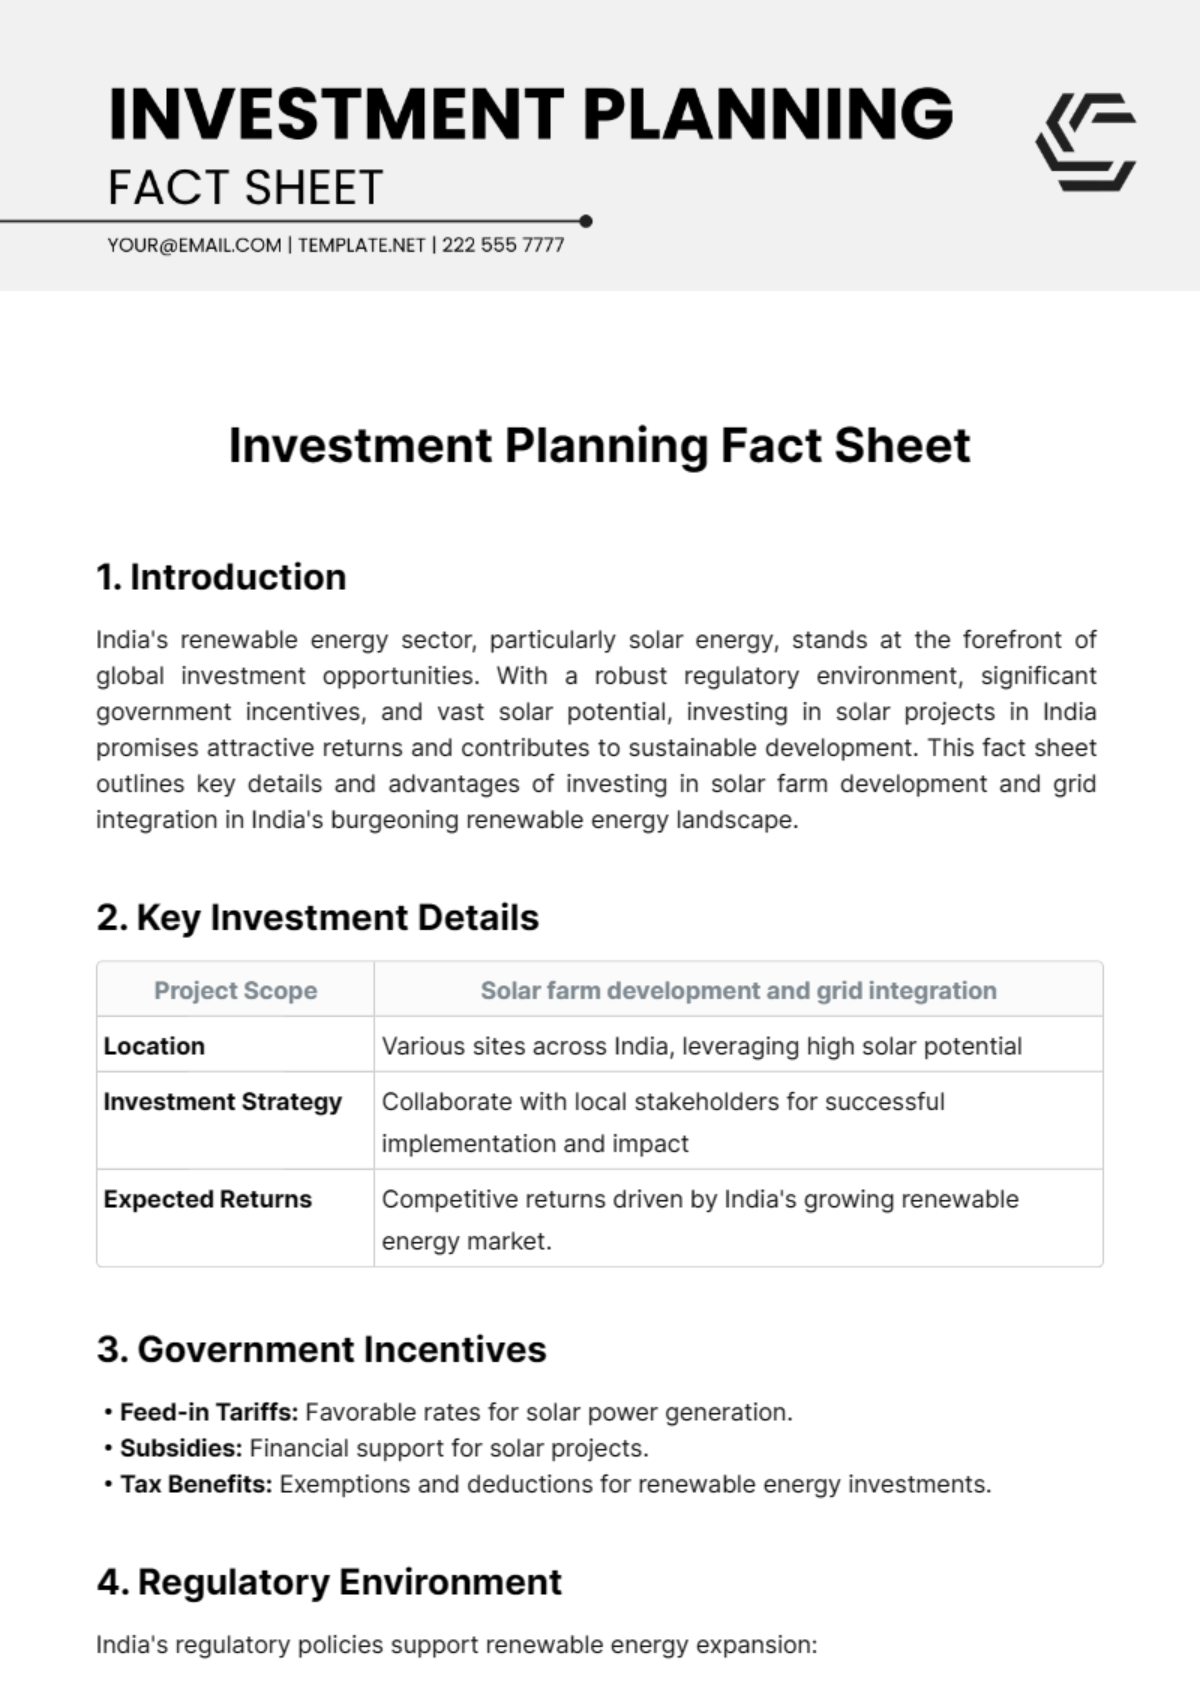 Free Investment Planning Fact Sheet Template